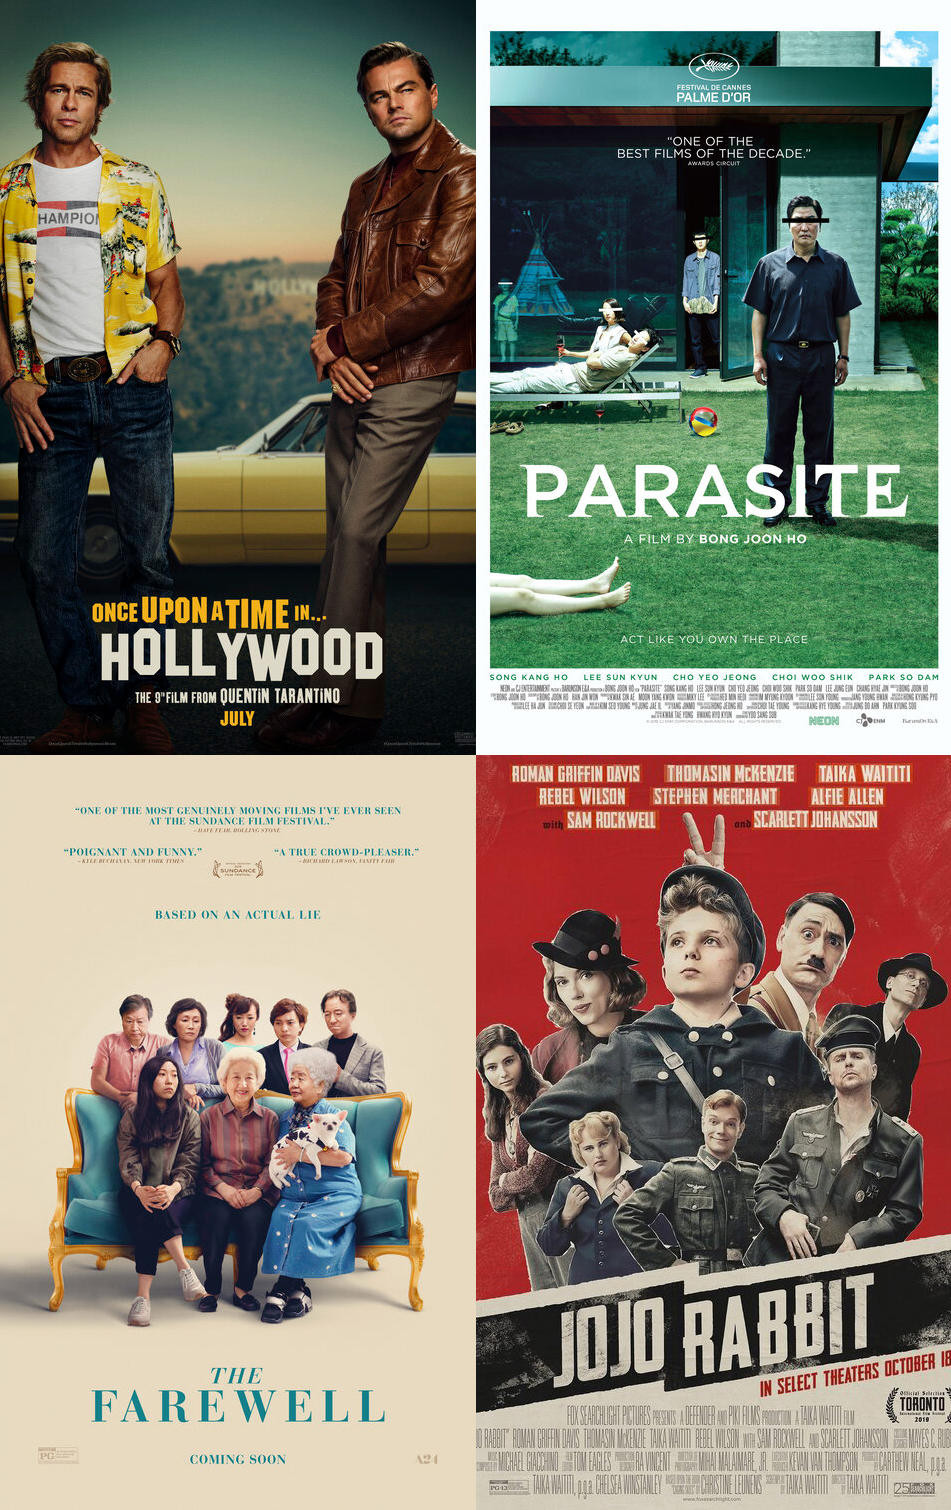 2019 in Movies: The Last Six Months